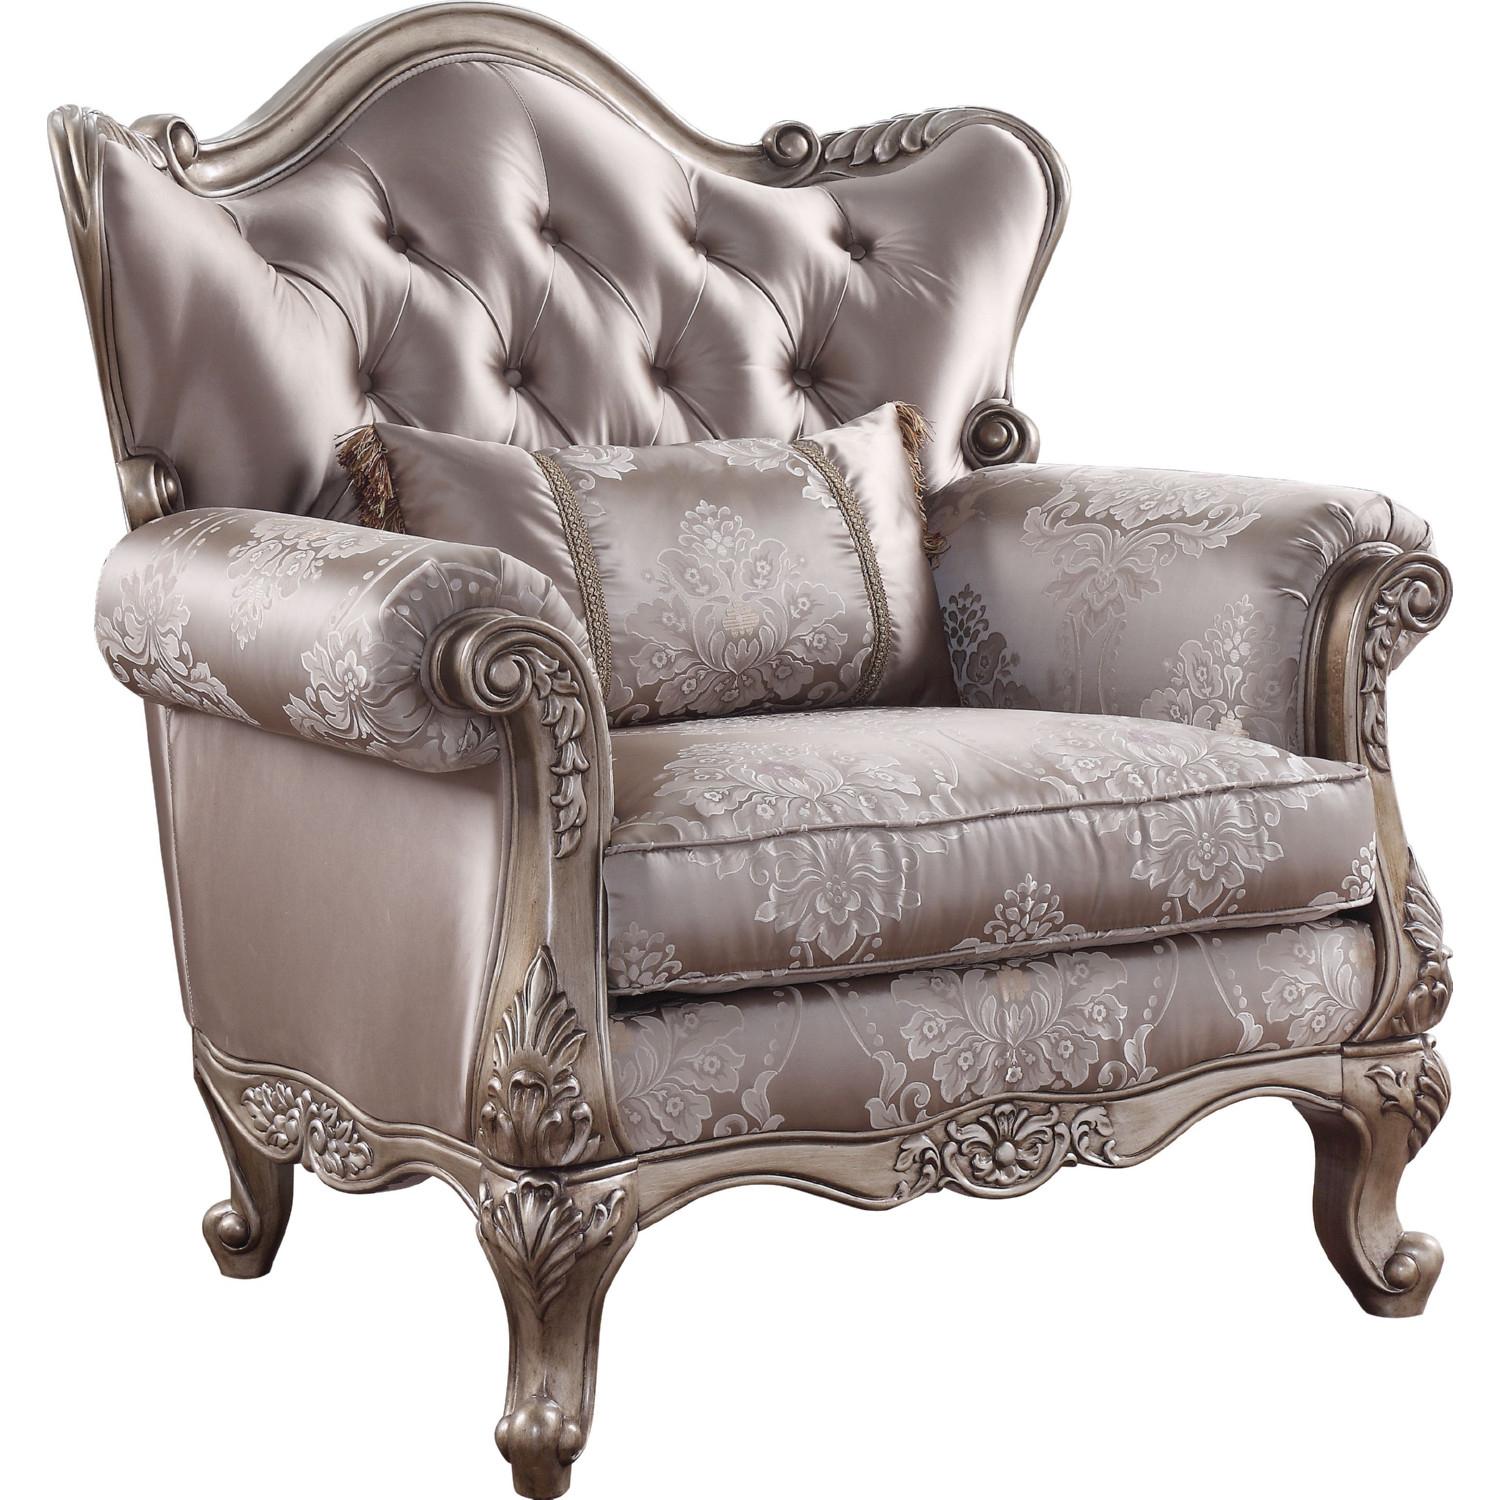 Traditional,  Vintage Arm Chair Jayceon 54867 54867 Jayceon in Champagne Fabric